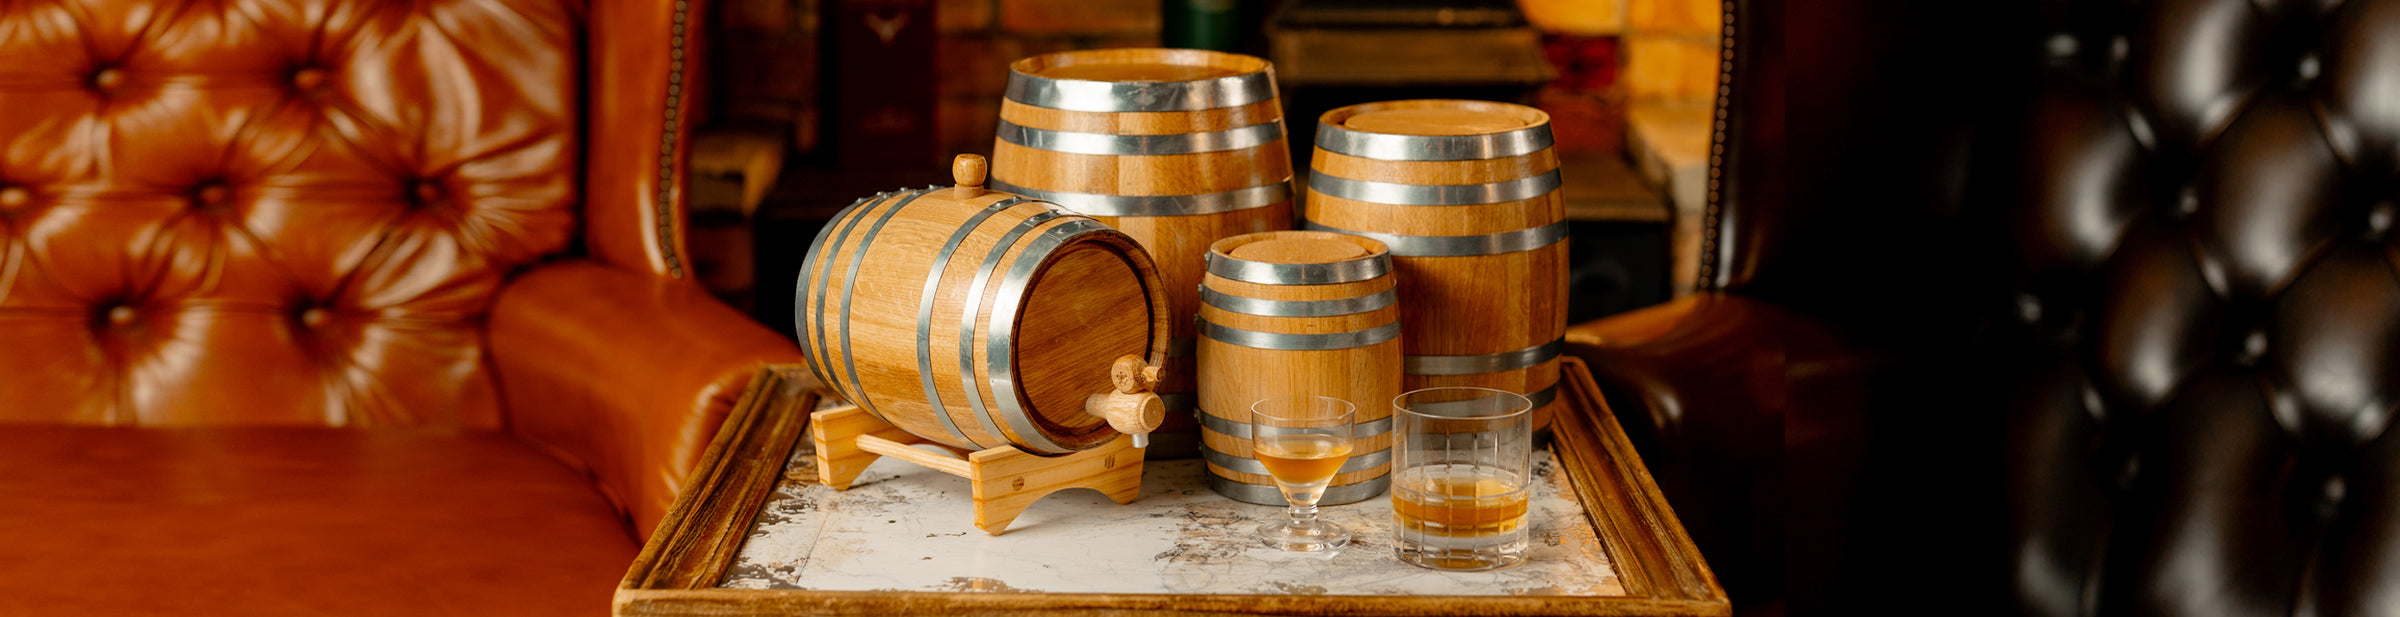 How to barrel age spirits